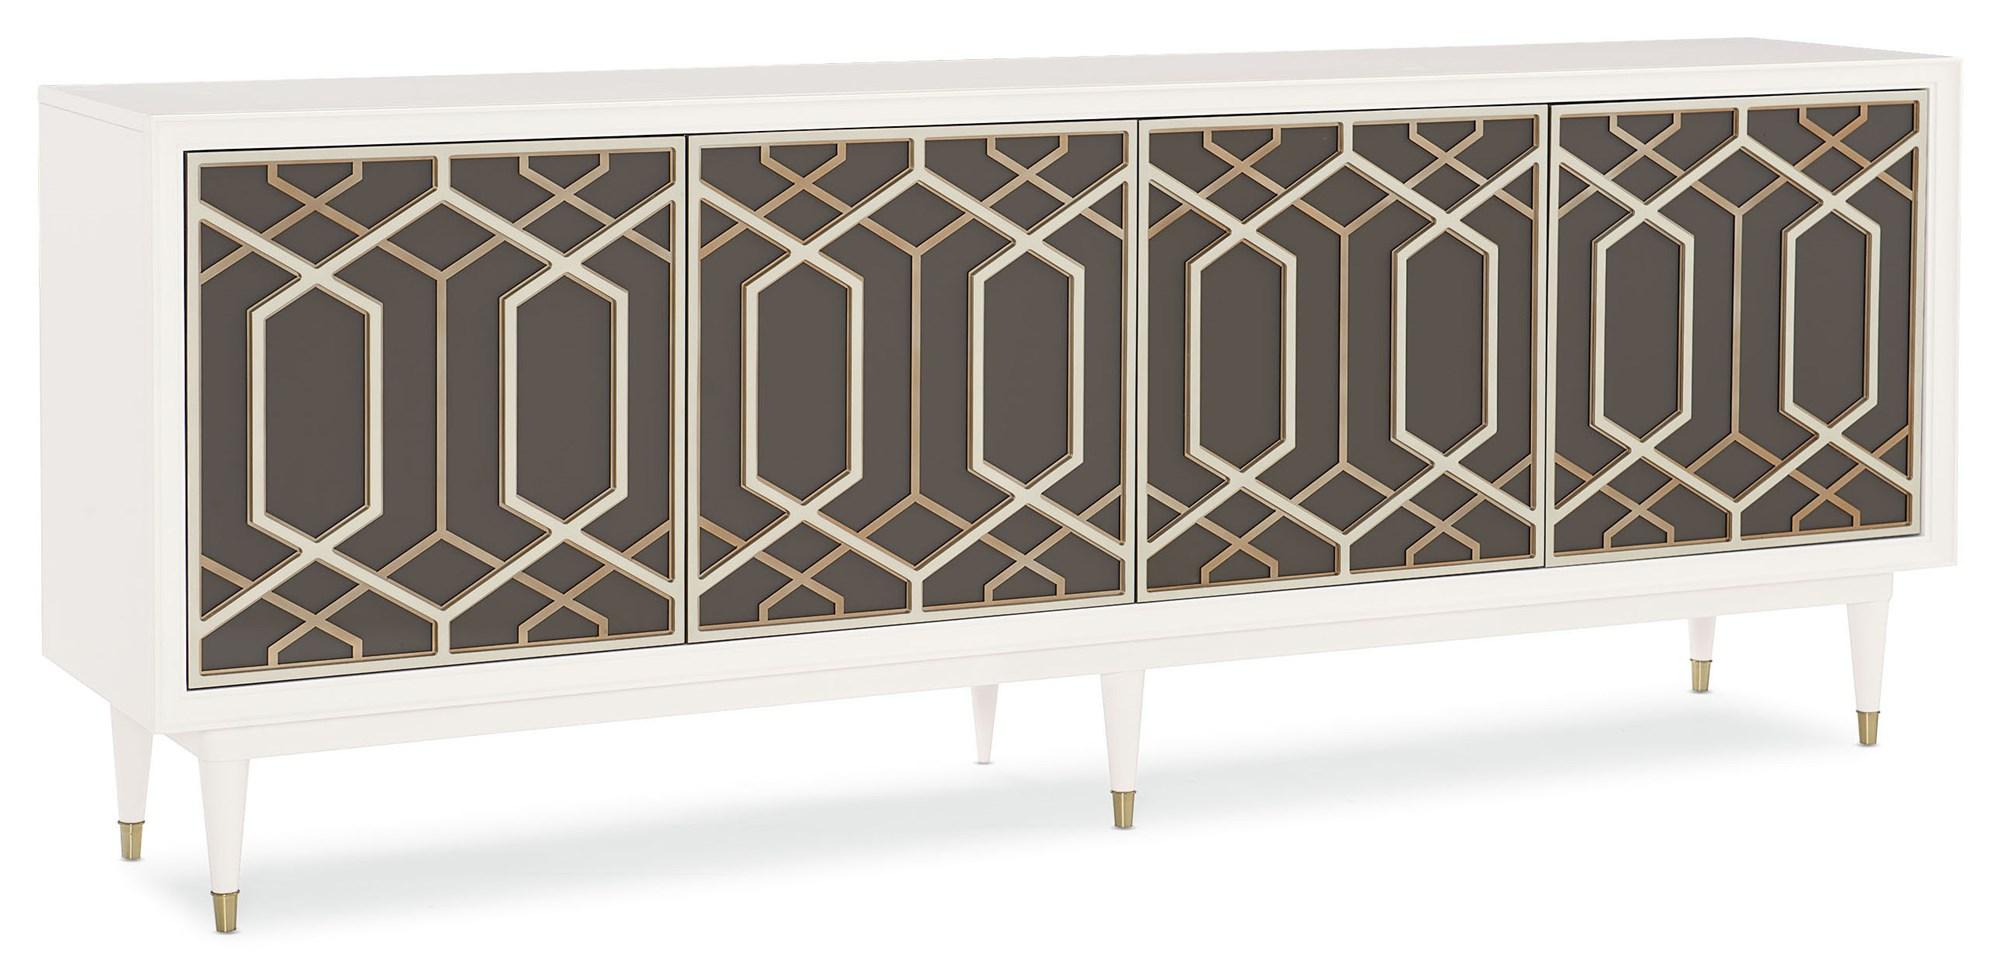 

    
UPH-420-131-A-Set-3 Champagne Gold Metal Fretwork & Wood Accent Chairs & Cabinet Set 3Pcs JUST DUET by Caracole
